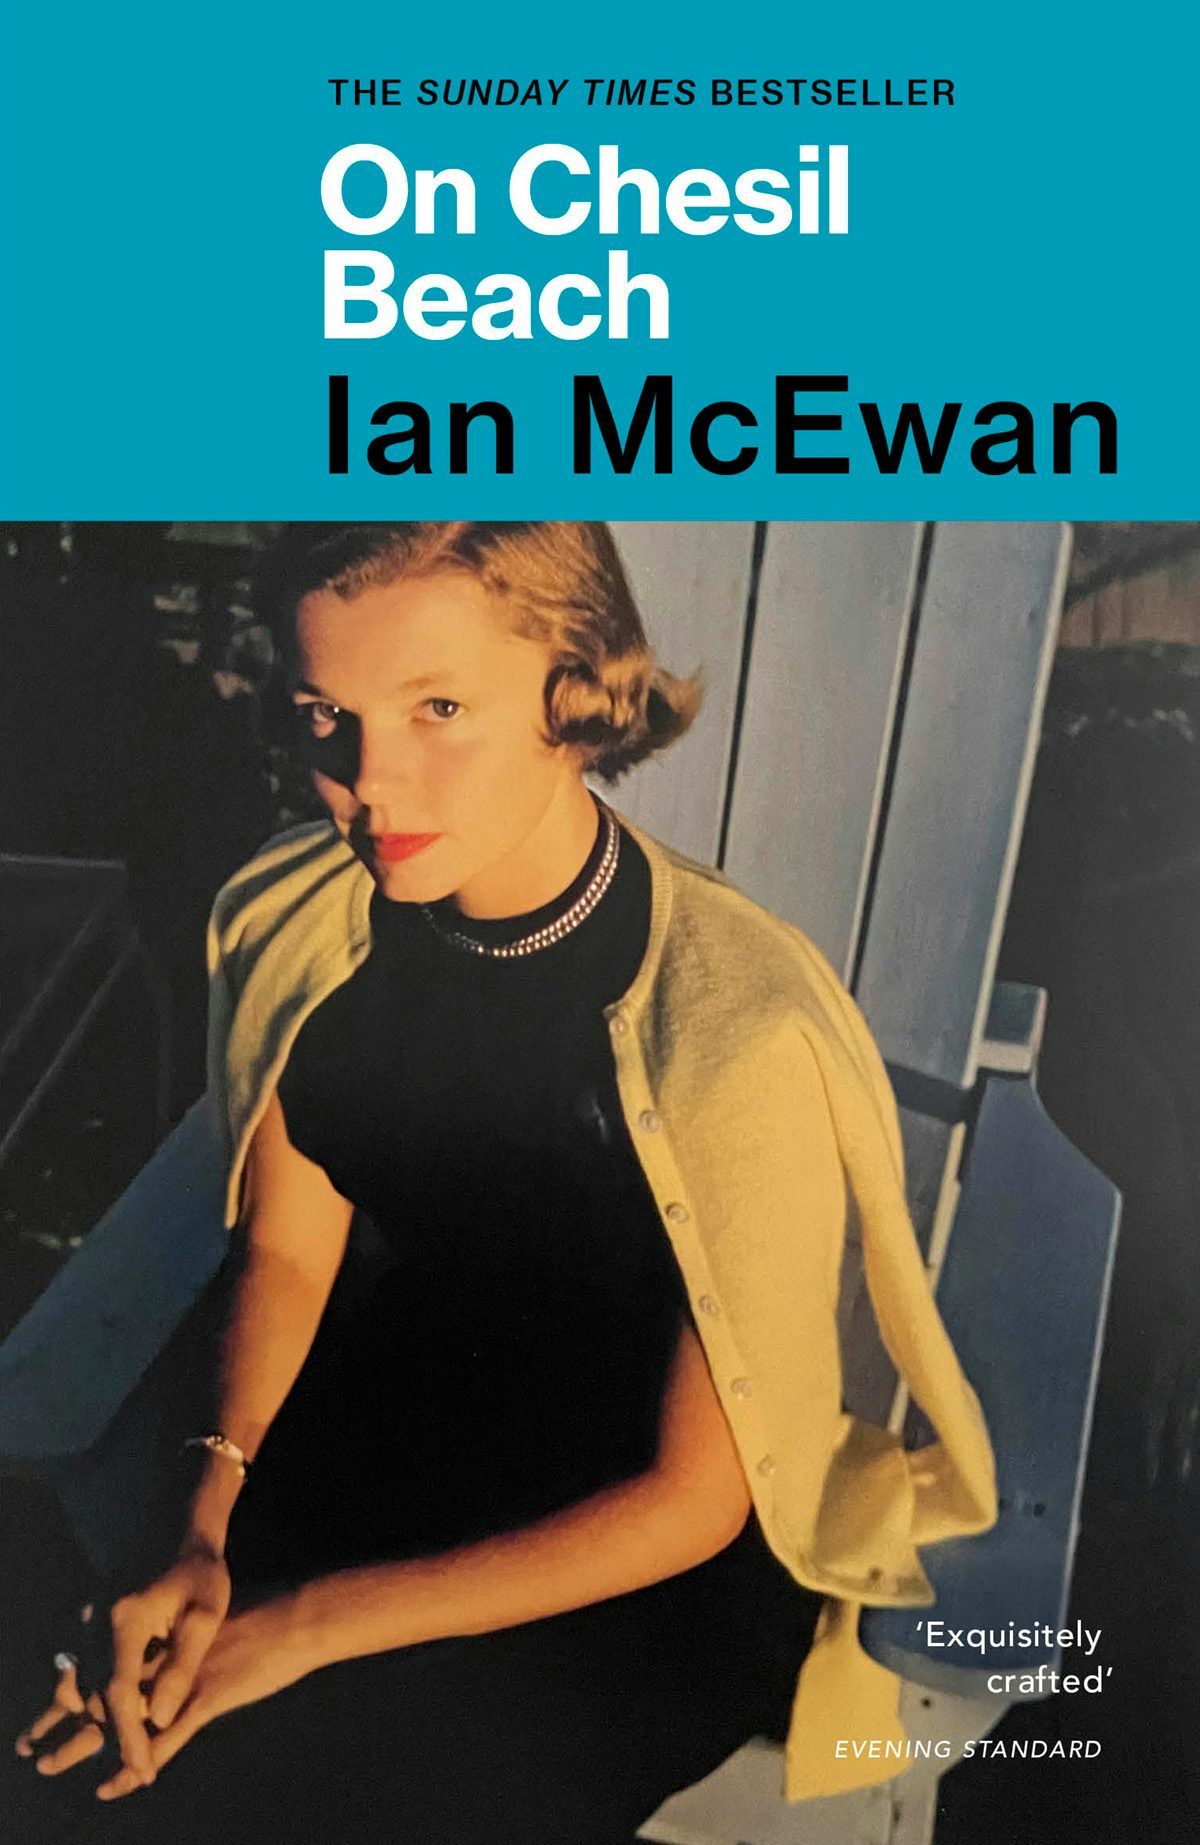 Cover of On Chesil Beach by Ian McEwan showing a warm hued photo of a young person with curled hair styled in a 1940s hairdo, wearing a beige cardigan over their shoulders, and their hands placed on top of each other on the person's lap